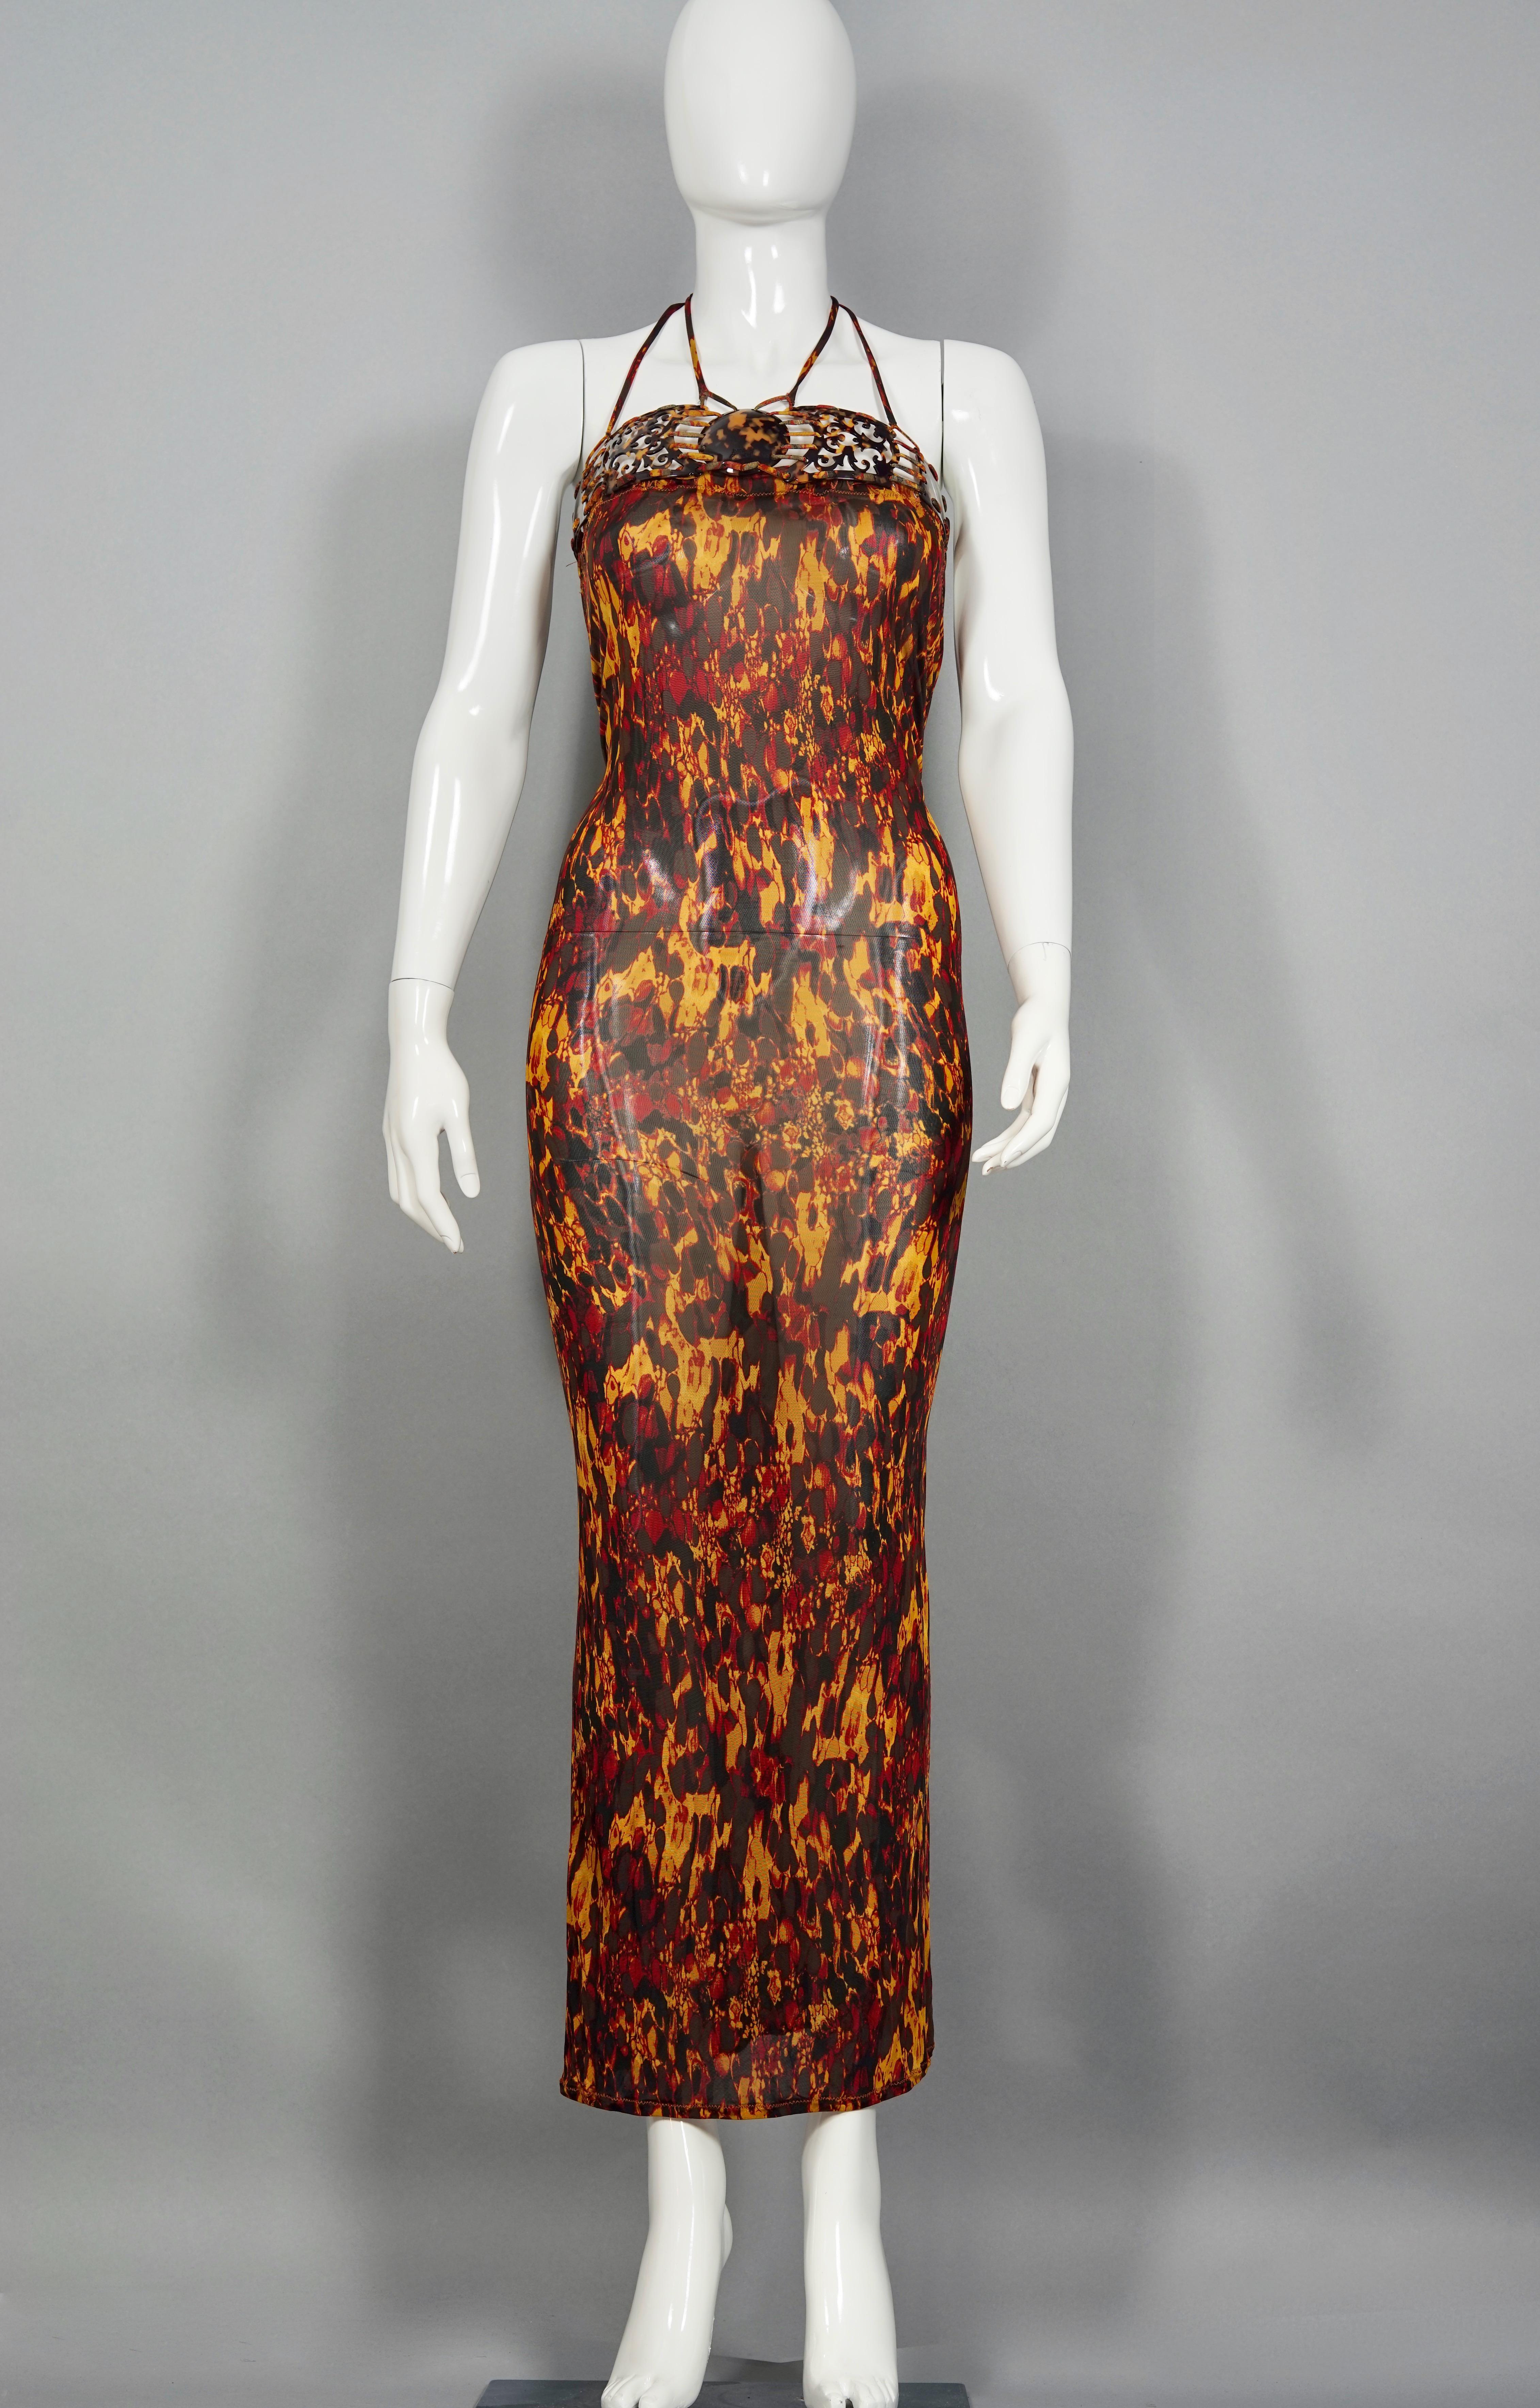 Vintage 1997 JEAN PAUL GAULTIER Tortoise Shell Embellished Print Open Back Dress

Measurements taken laid flat, please double bust, waist and hips:
Bust: 15.75 inches (40 cm) open back can accommodate bigger size
Waist: 13.38 inches (34 cm) without